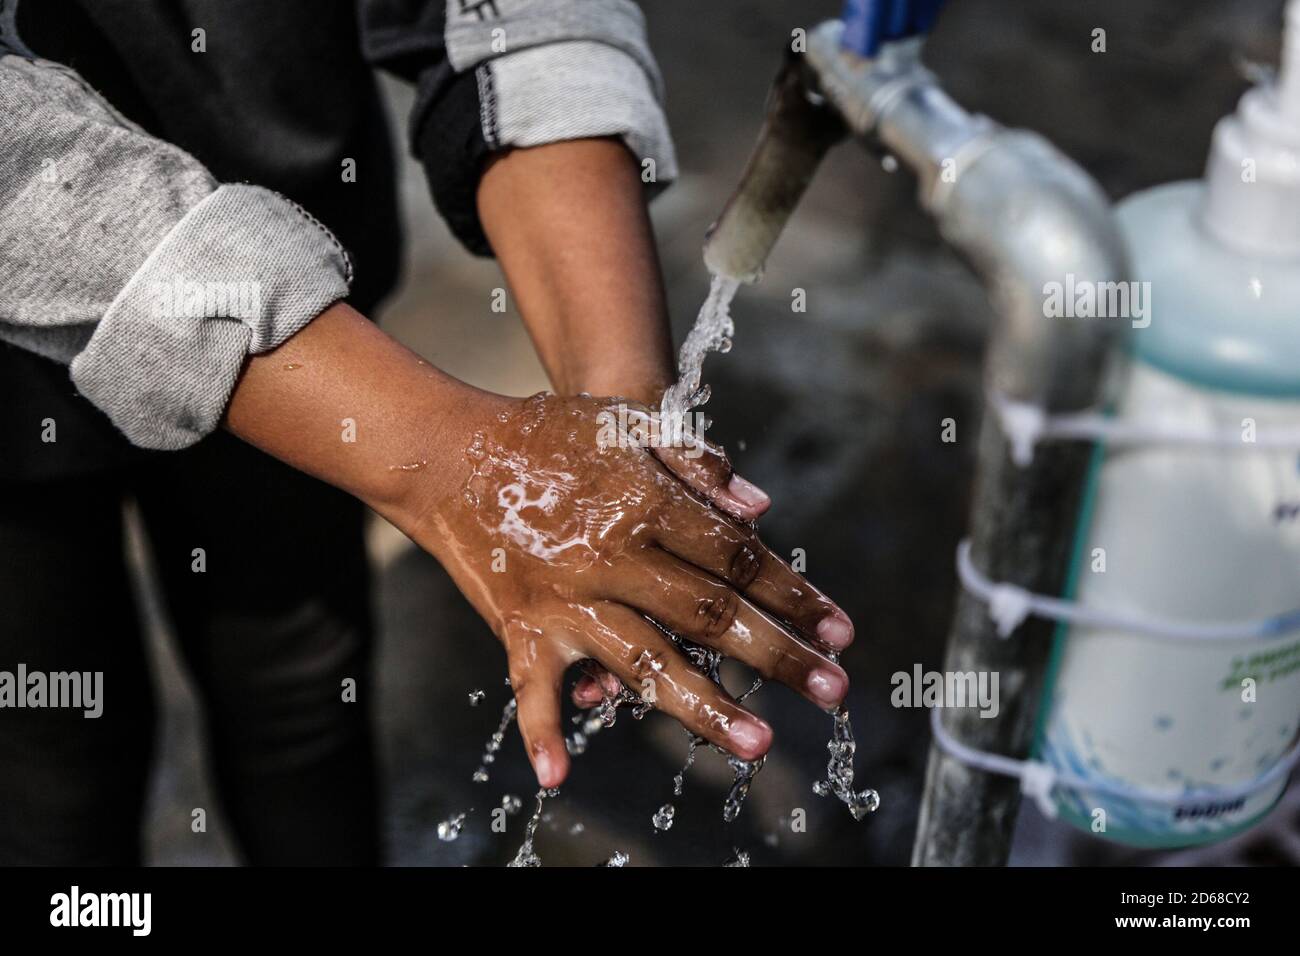 Bogor, Indonesia. 15th Oct, 2020. Indonesian children washes his hands together during the World Handwashing Day 2020 in Bogor, West Java, Indonesia, on October 15, 2020. Thorough hand washing is an effective protection against many infectious diseases amid the COVID19 pandemic. (Photo by Aditya Saputra/INA Photo Agency/Sipa USA) Credit: Sipa USA/Alamy Live News Stock Photo